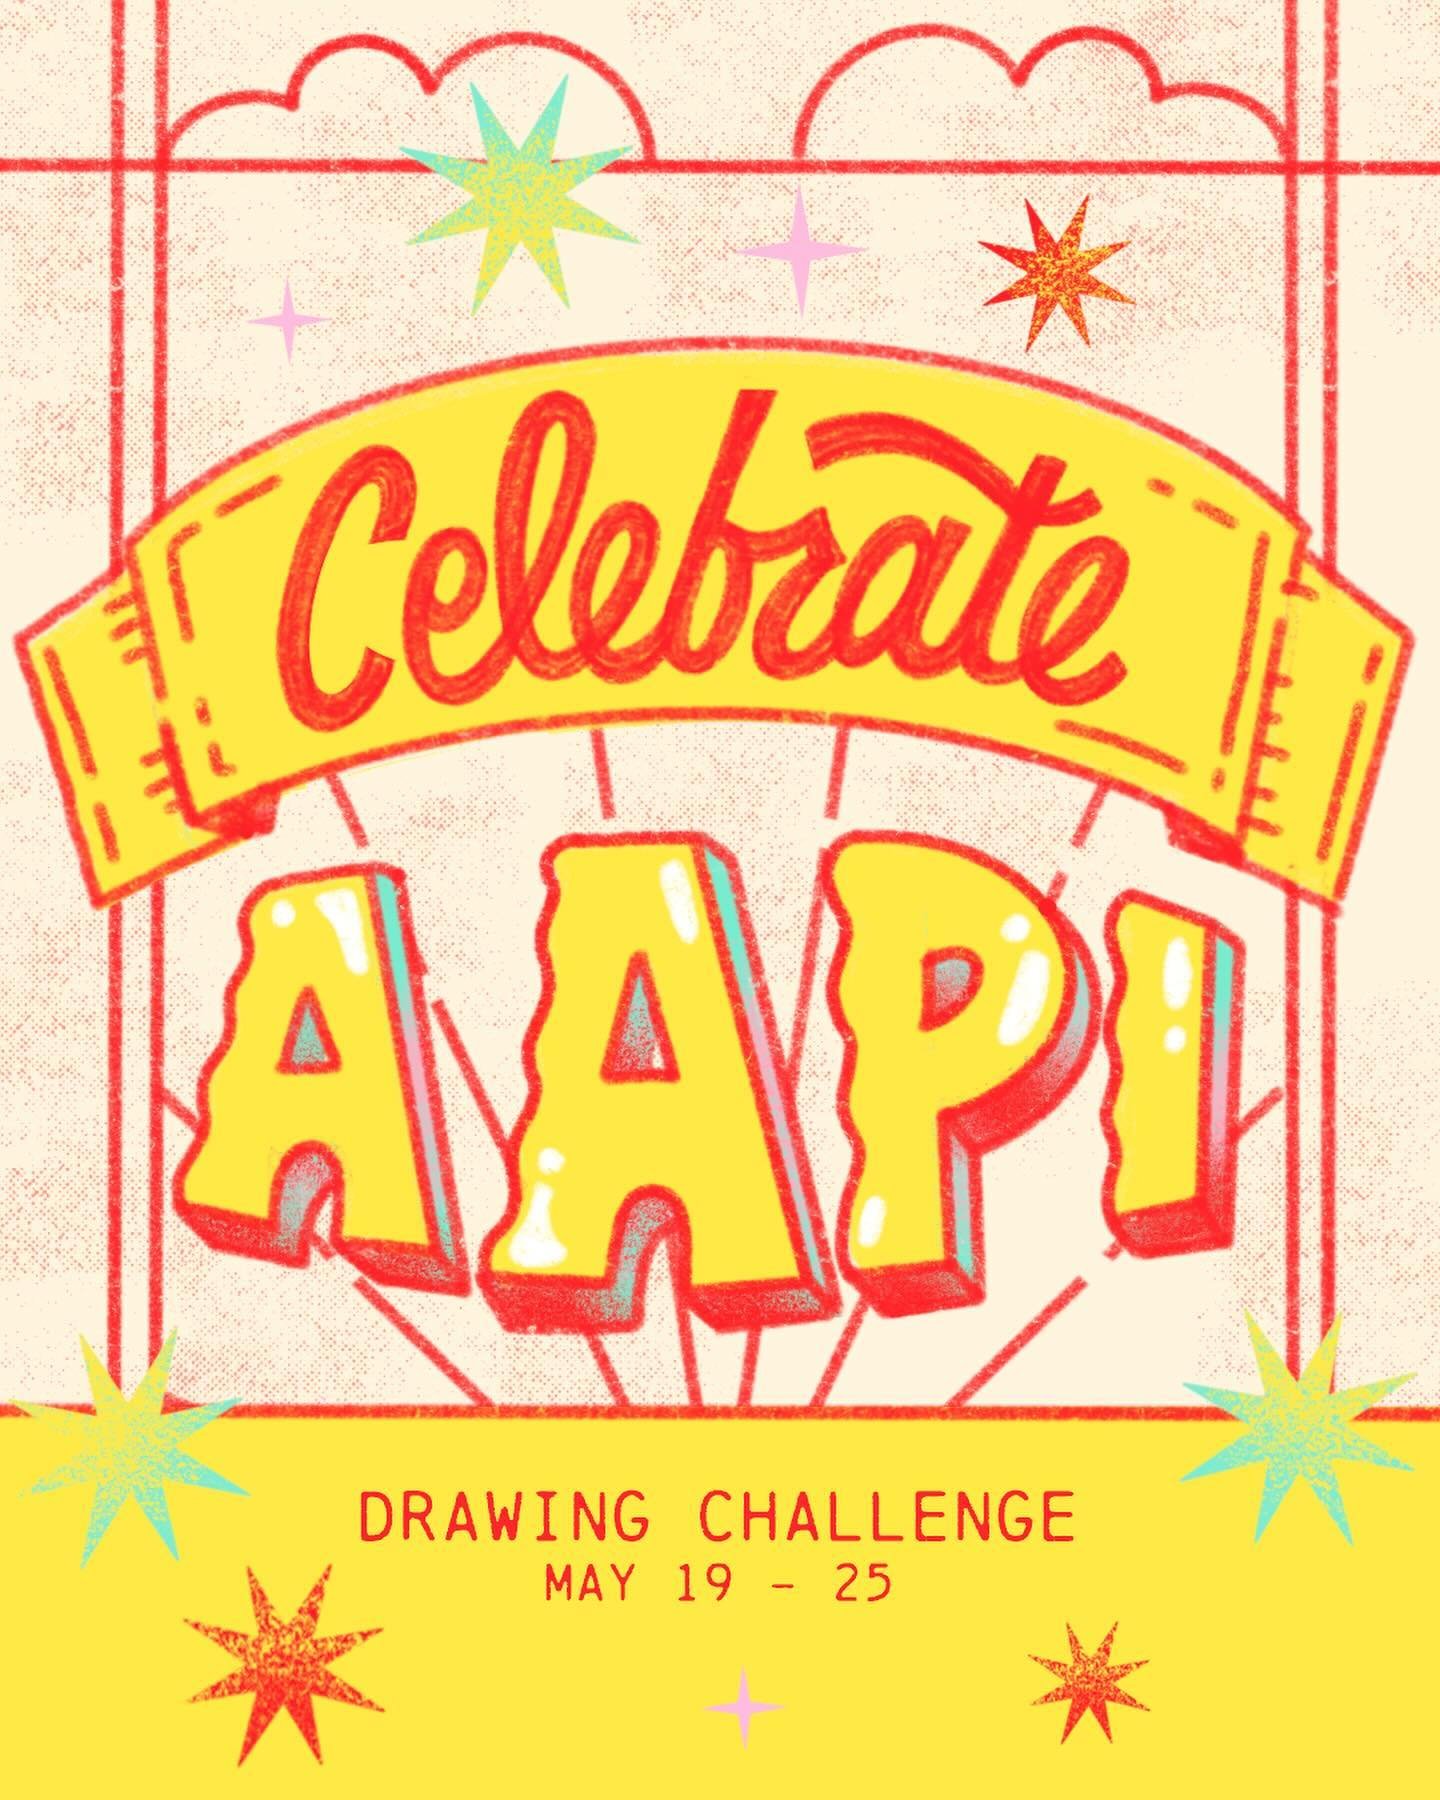 Happy AAPI Heritage Month! I&rsquo;m excited to be sharing another drawing challenge with @jane.gahng and @jojowangdesigns to celebrate AAPI Heritage Month 🥳 From May 19th to 25th, we&rsquo;ll have 3 prompts + a giveaway of the year of the dragon go